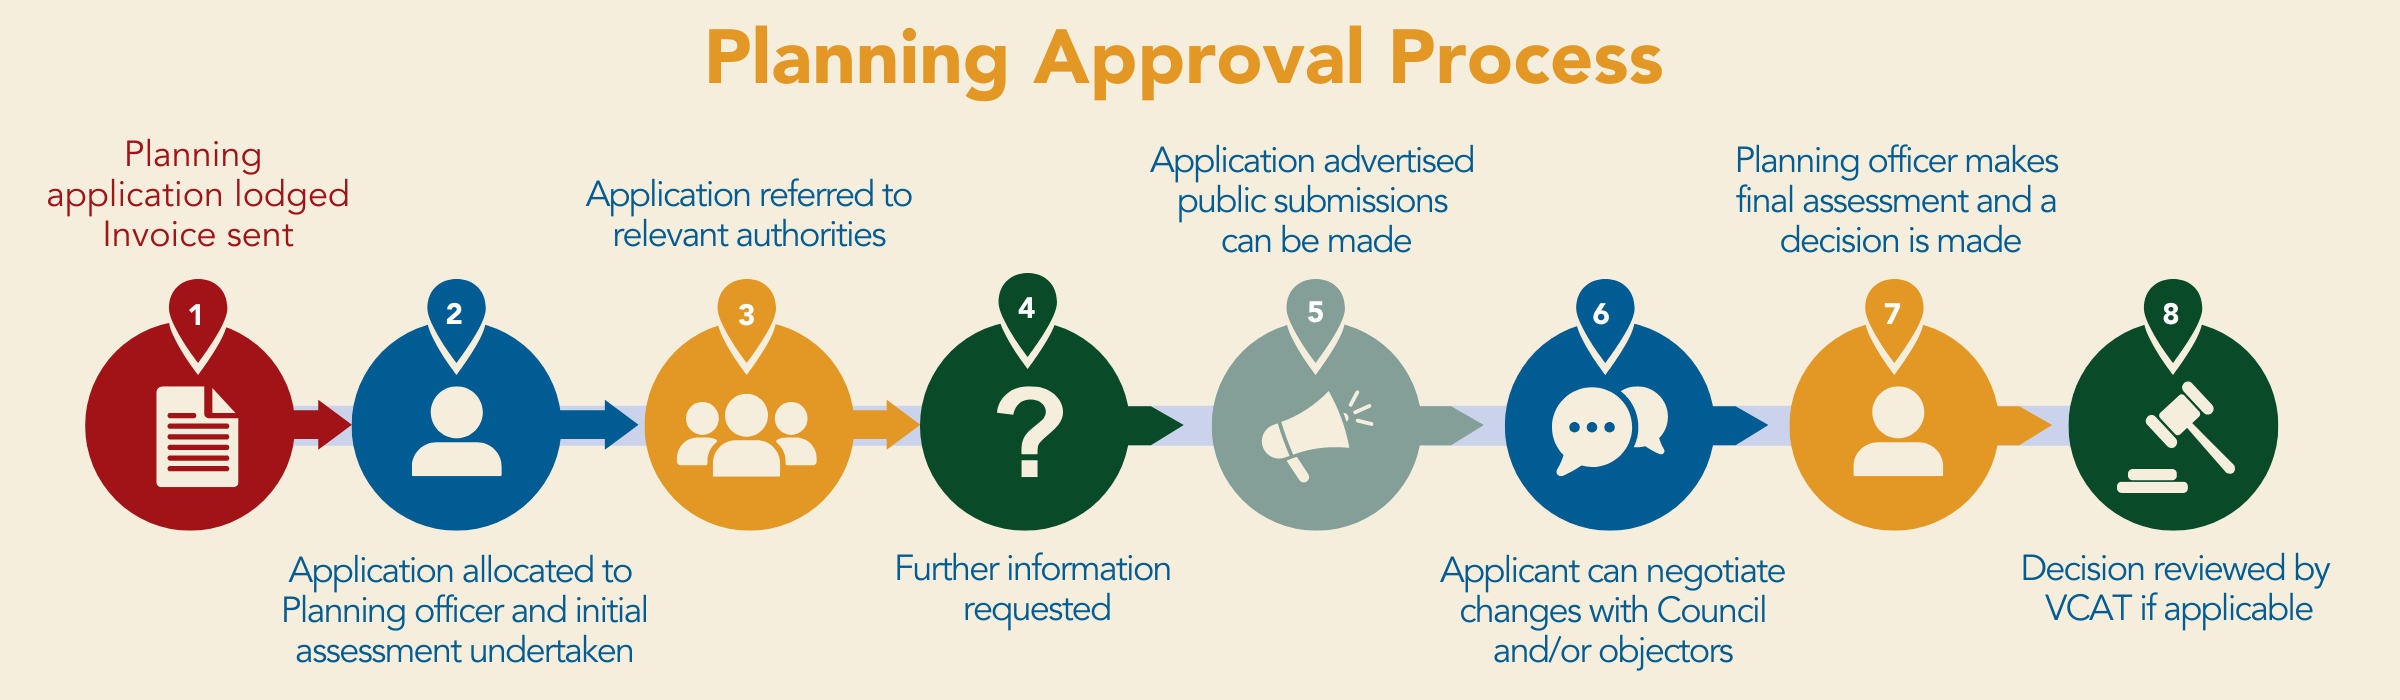 HORSHAM-Planning-approval-process.png